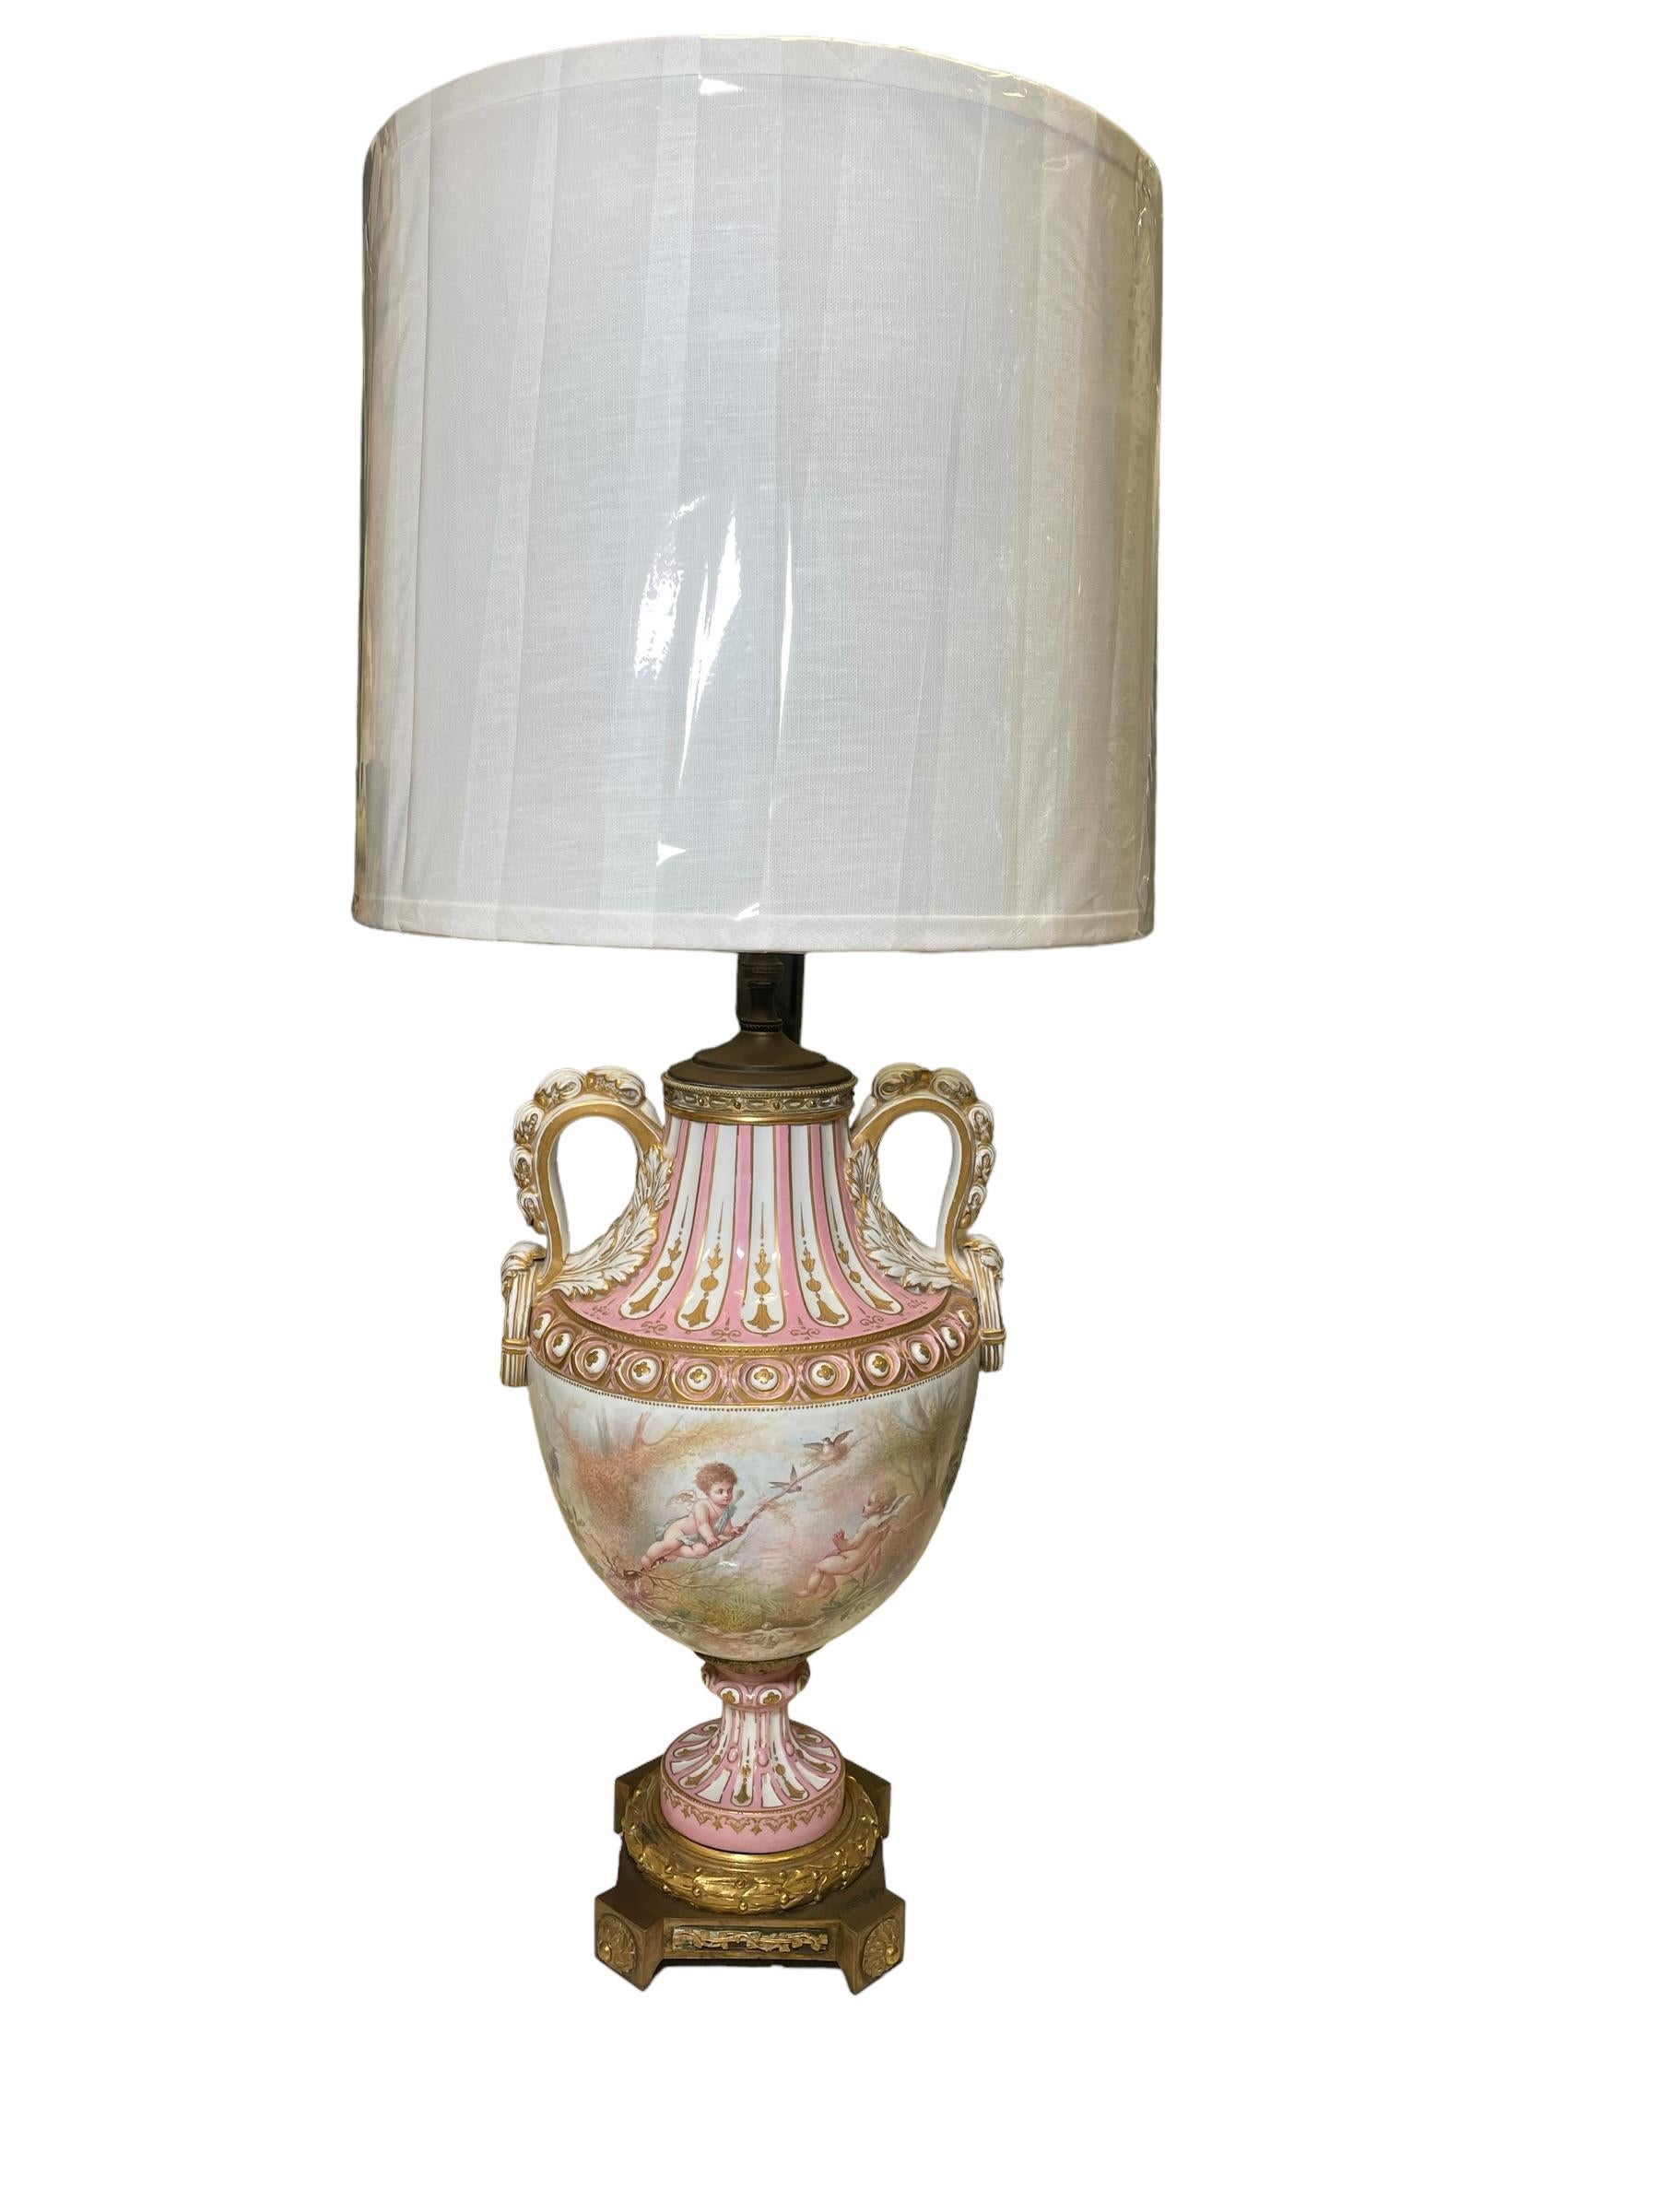 M. Demonceaux Sevres Style Porcelain Bronze Mounted Urn Table Lamp For Sale 10